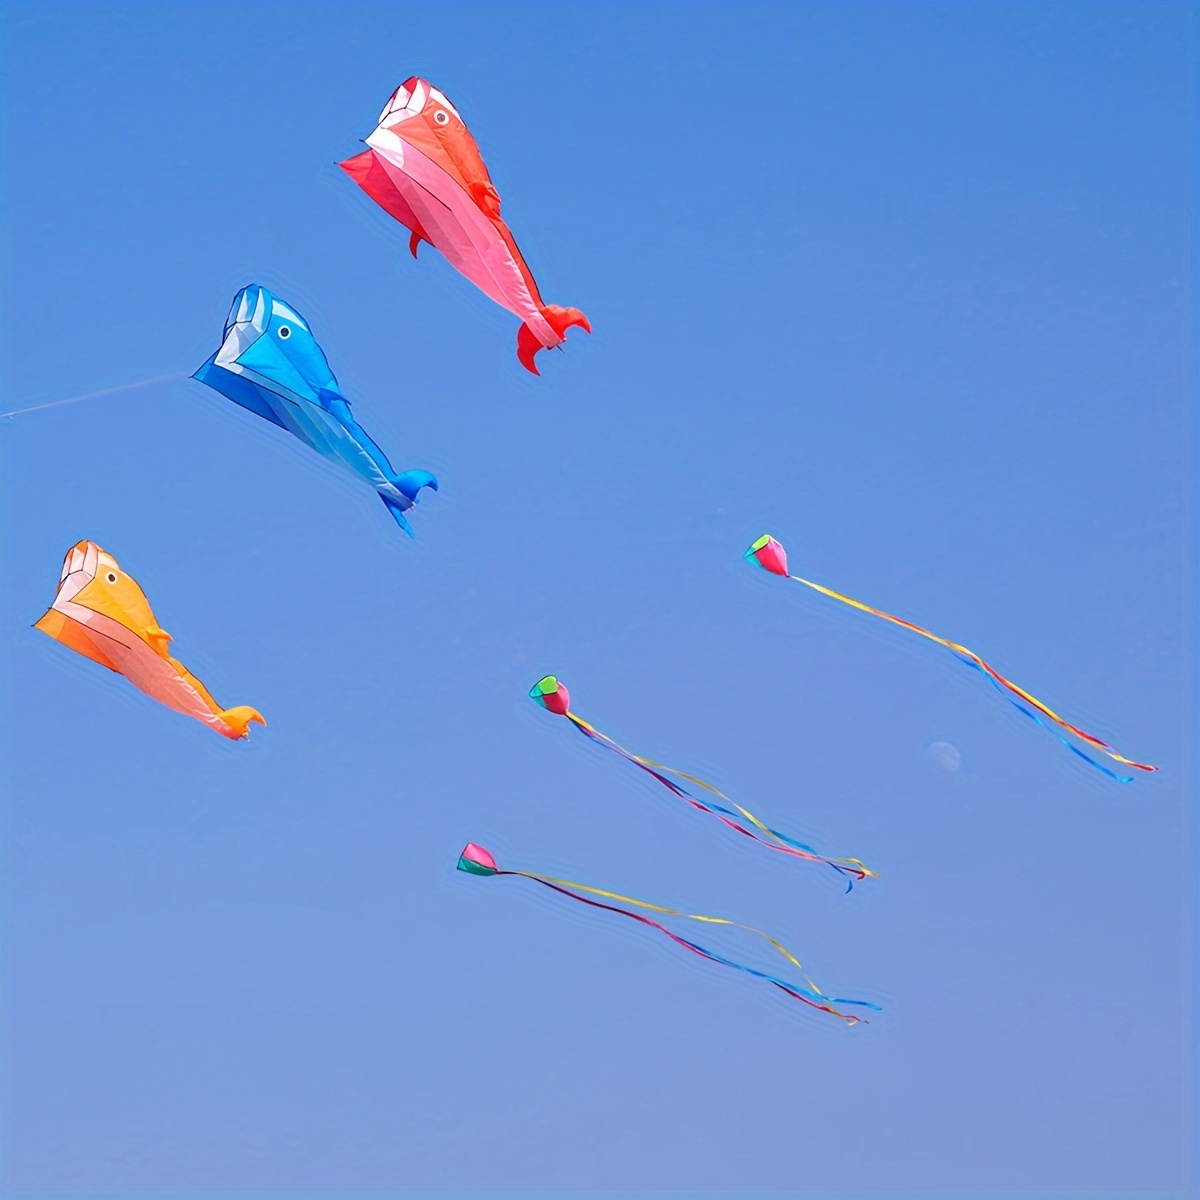 Large Dolphin Kite With 300ft Kite Line Boneless Frameless Soft Giant 3d  Kite Suitable For Beach Park Yard Creative Kite For Outdoor Entertainment, Don't Miss These Great Deals